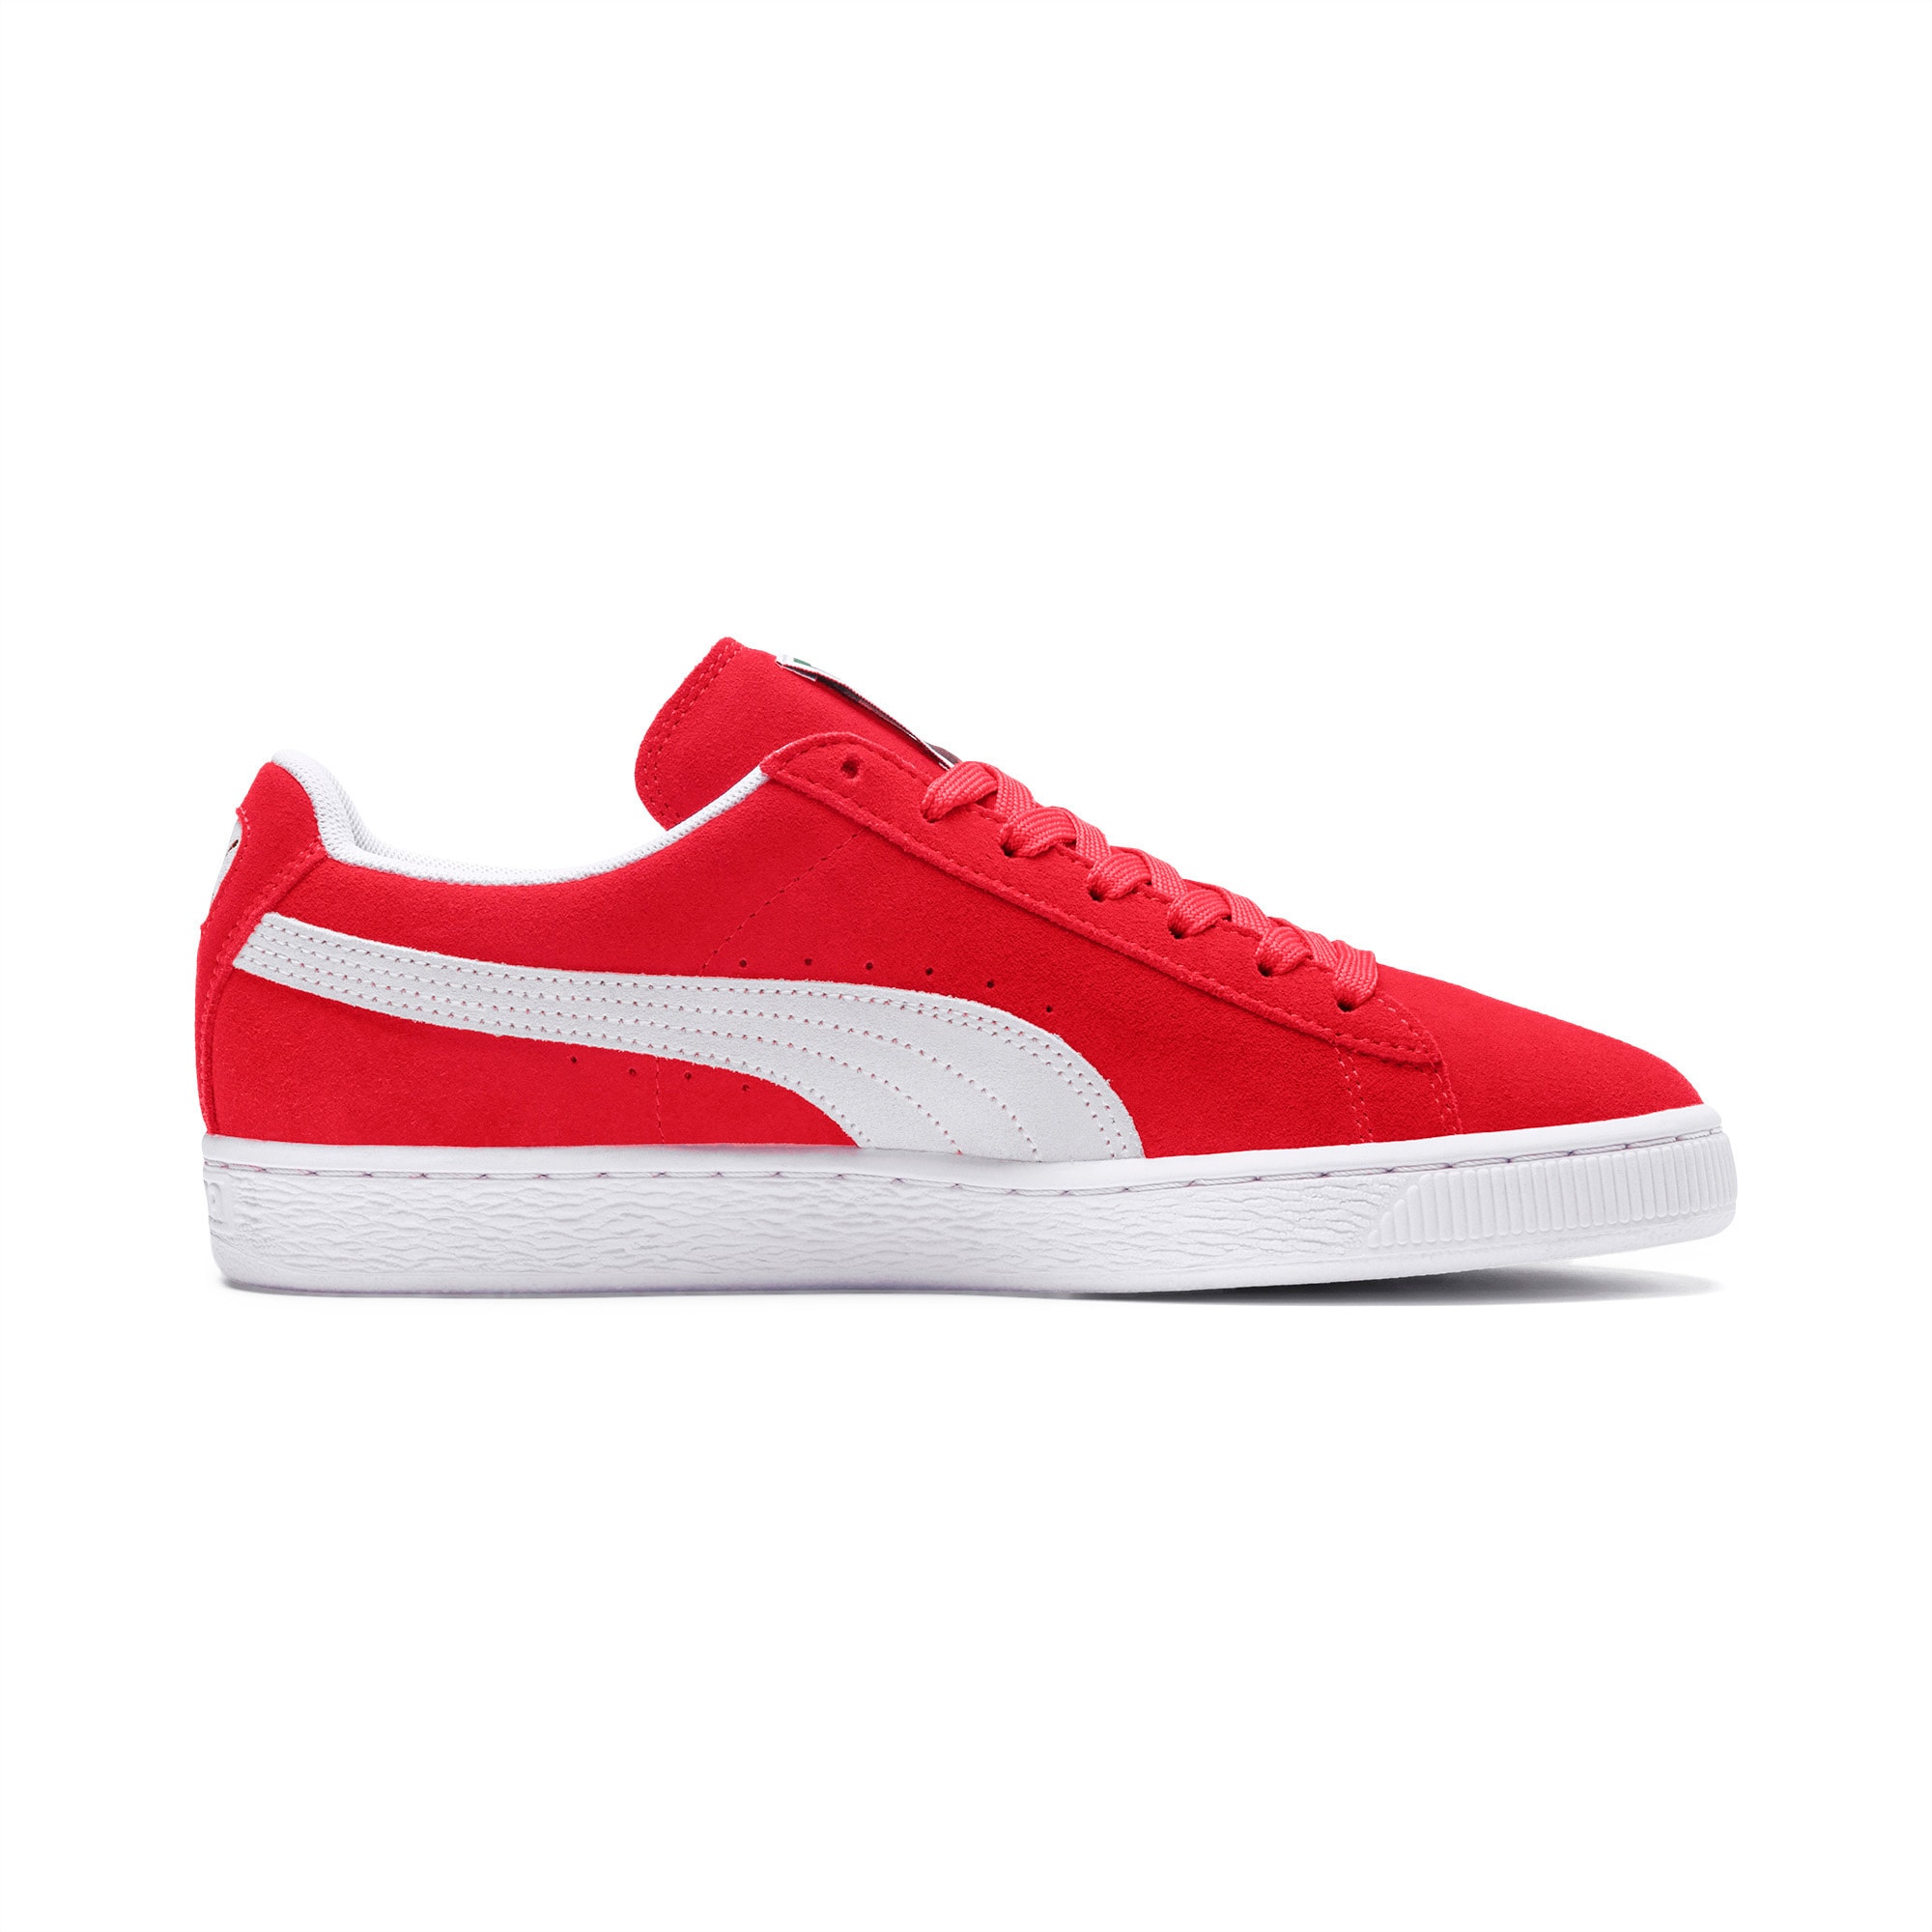 puma suede red shoes